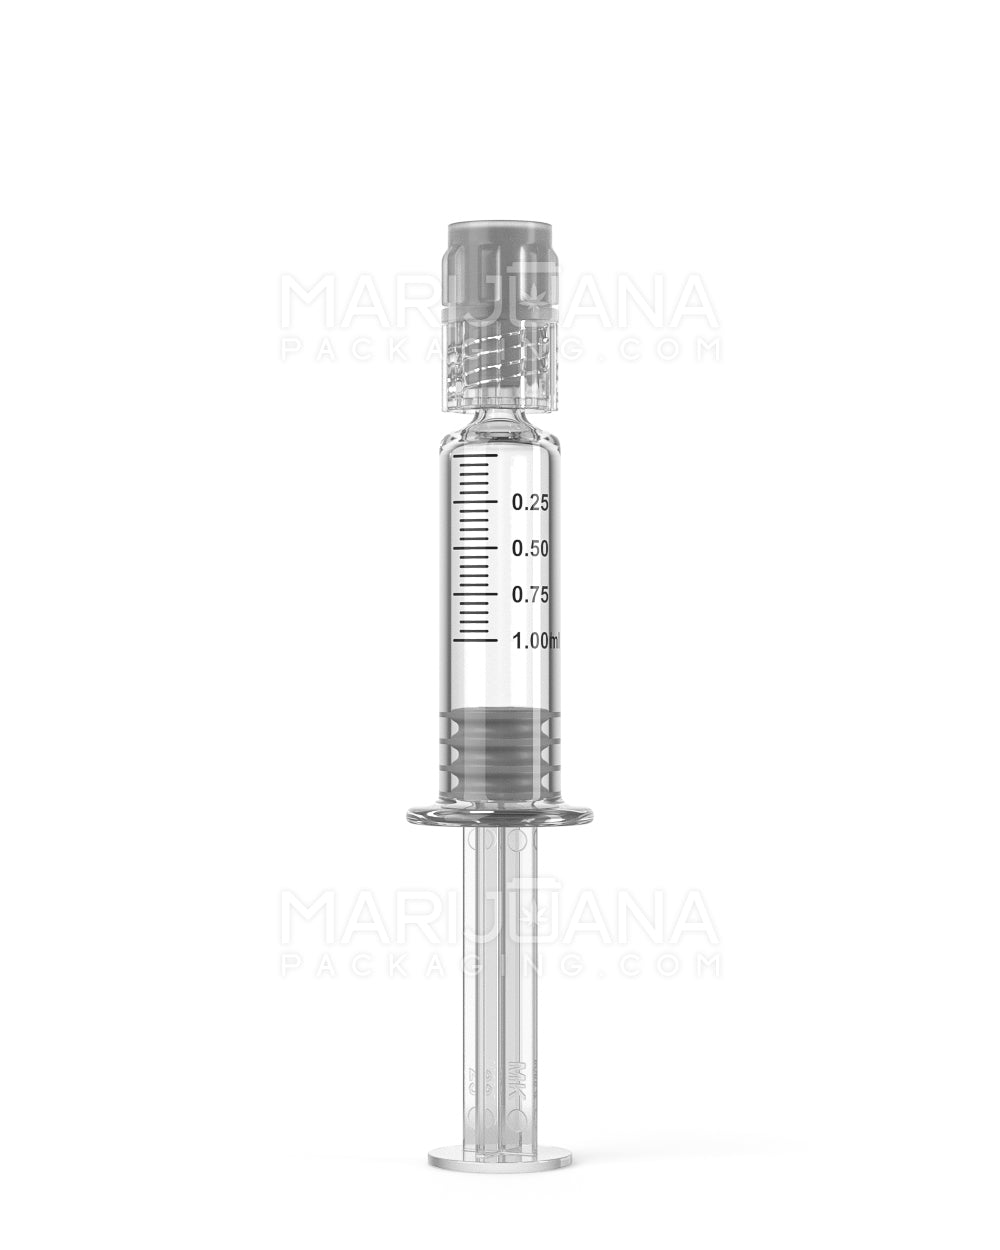 Luer Lock 1mL Glass Dab Syringes with 0.25mL Increments